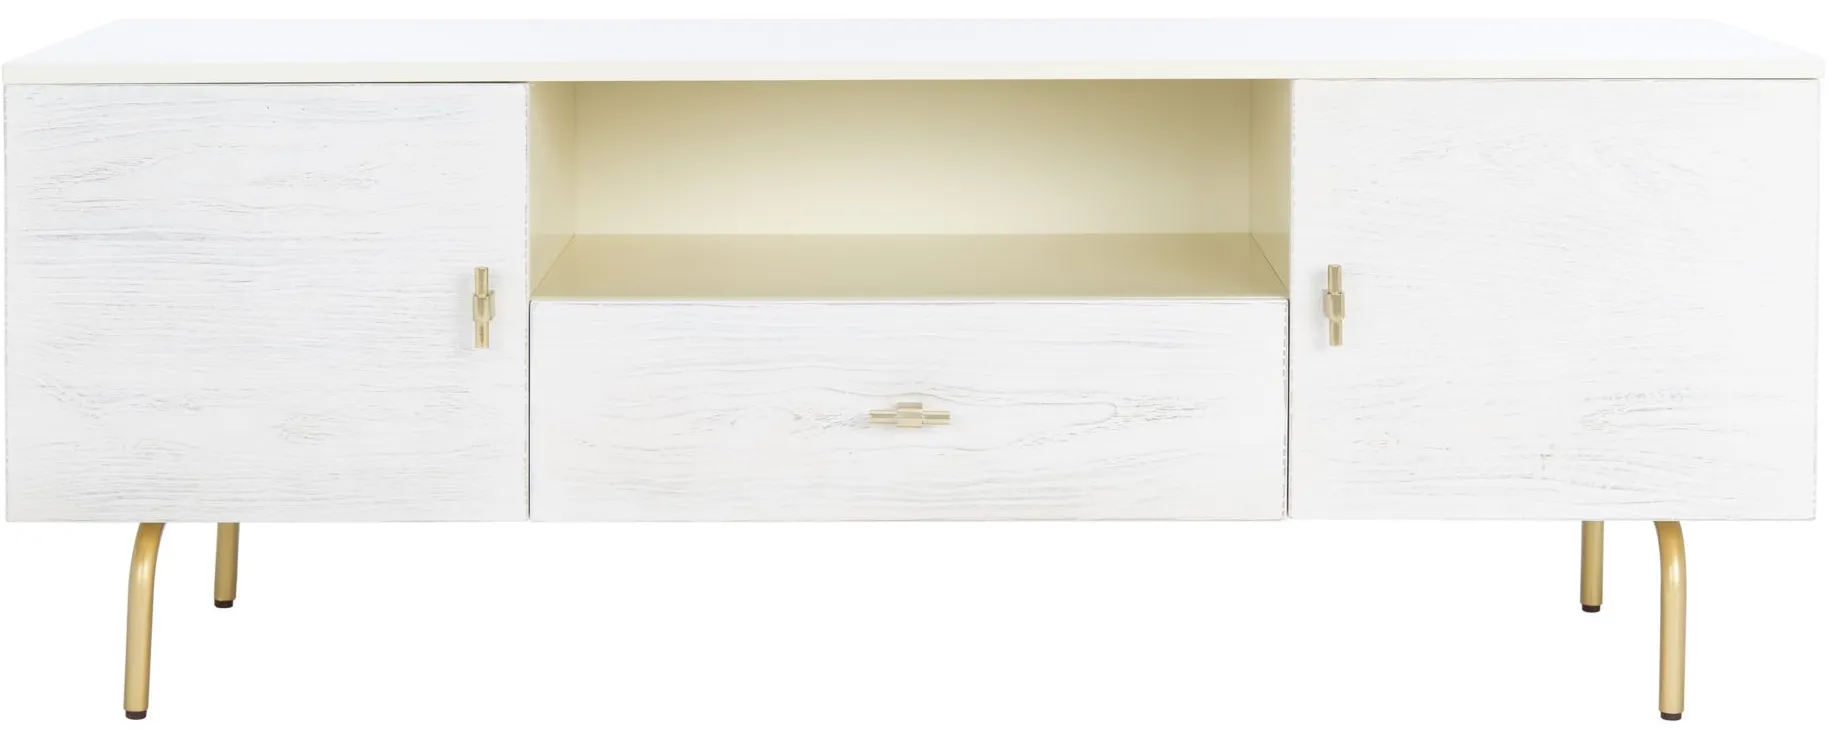 Oakley Media Stand in Cream / White Washed by Safavieh